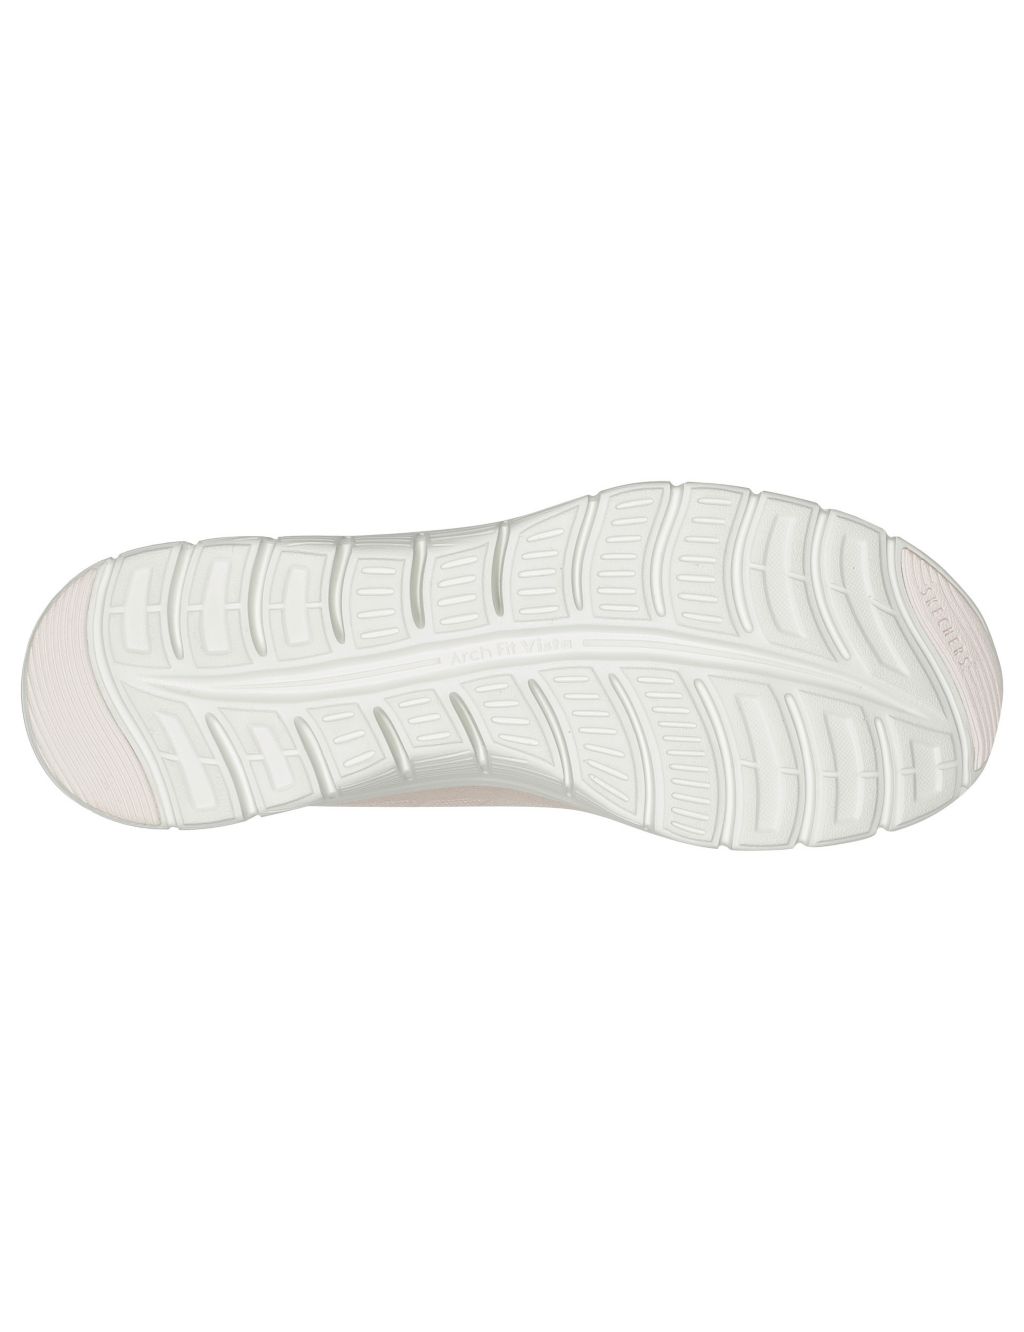 Arch Fit Vista Gleaming Knitted Trainers image 4